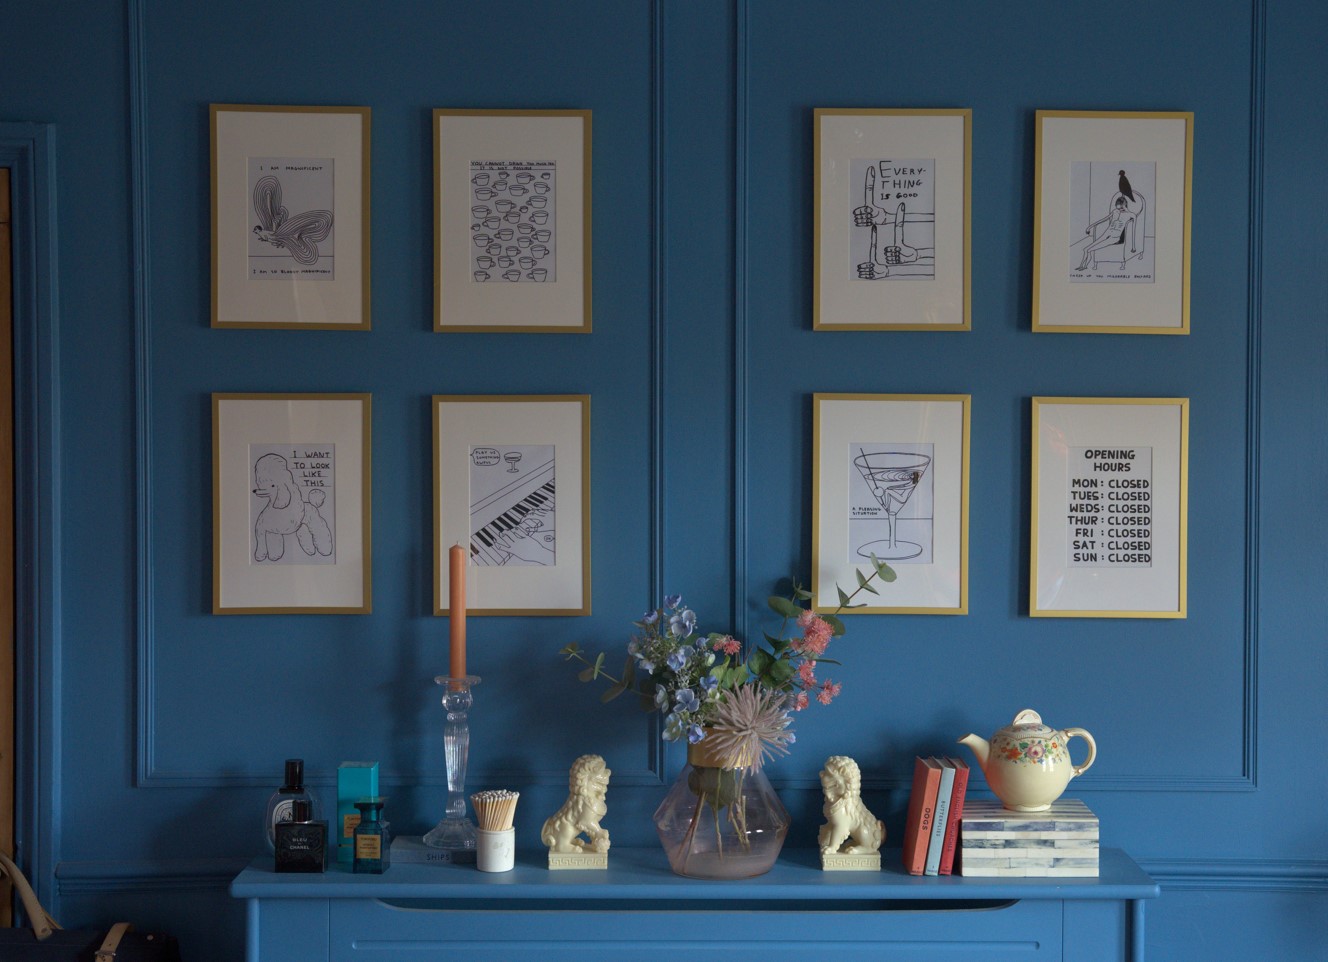 A blue wall, sketched prints, a shelf filled with ornaments and books